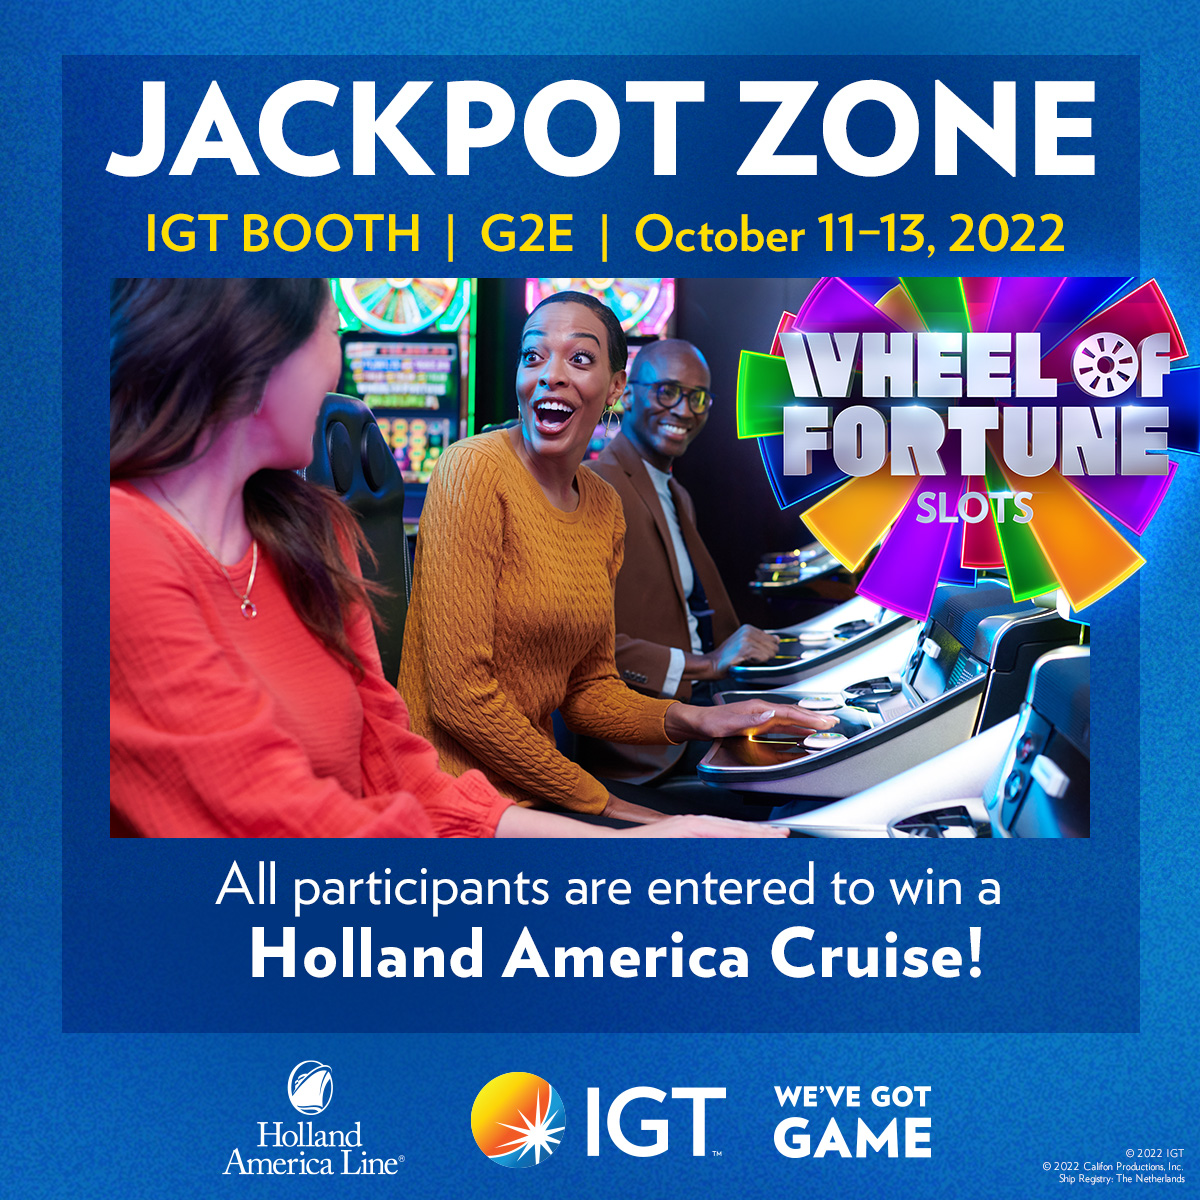 Join us at the Wheel of Fortune Jackpot Zone at @G2Eshows to celebrate the jackpot experience on some of our Wheel of Fortune WAP and Omnichannel products. Spin the Bonus Wheel to win prizes! Better yet, all participants are entered to win a @HALcruises cruise!